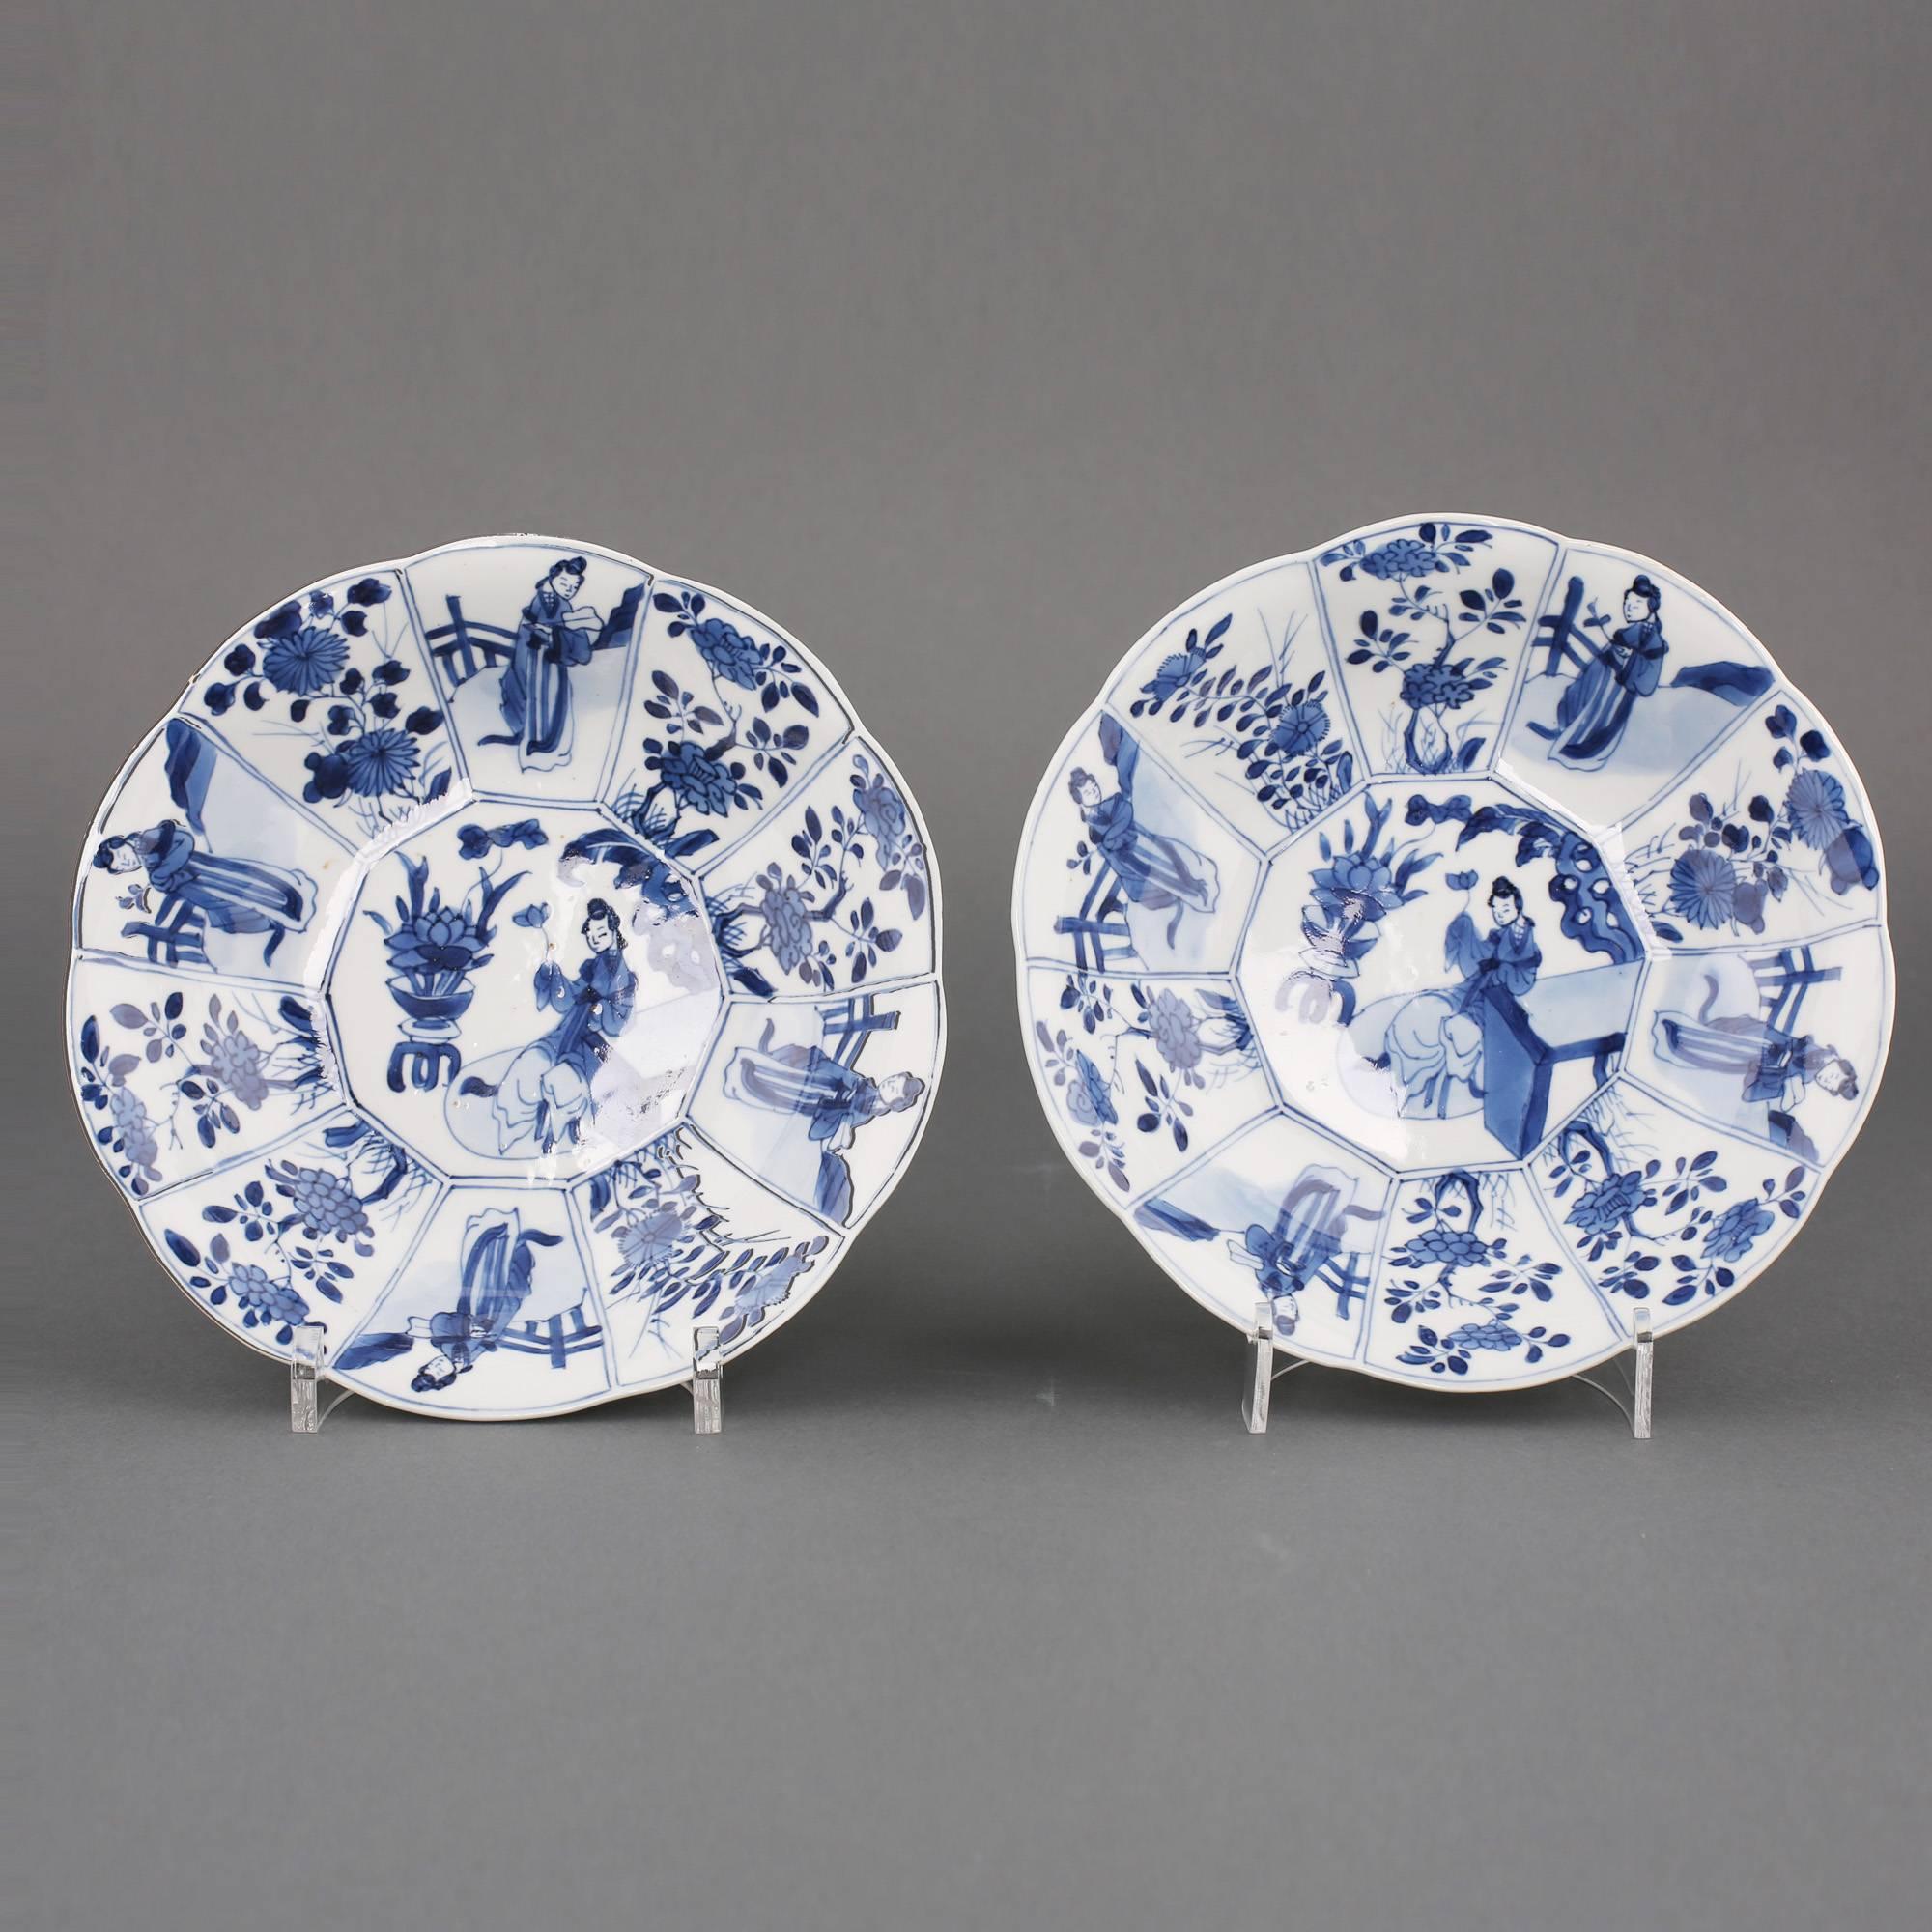 Pair of Chinese porcelain blue and white dishes with lobbed rims, the centres painted with a lady holding a lotus bloom while seated at a table beside a potted flowering lotus plant and rock work within a border of ten panels, four with ladies in a